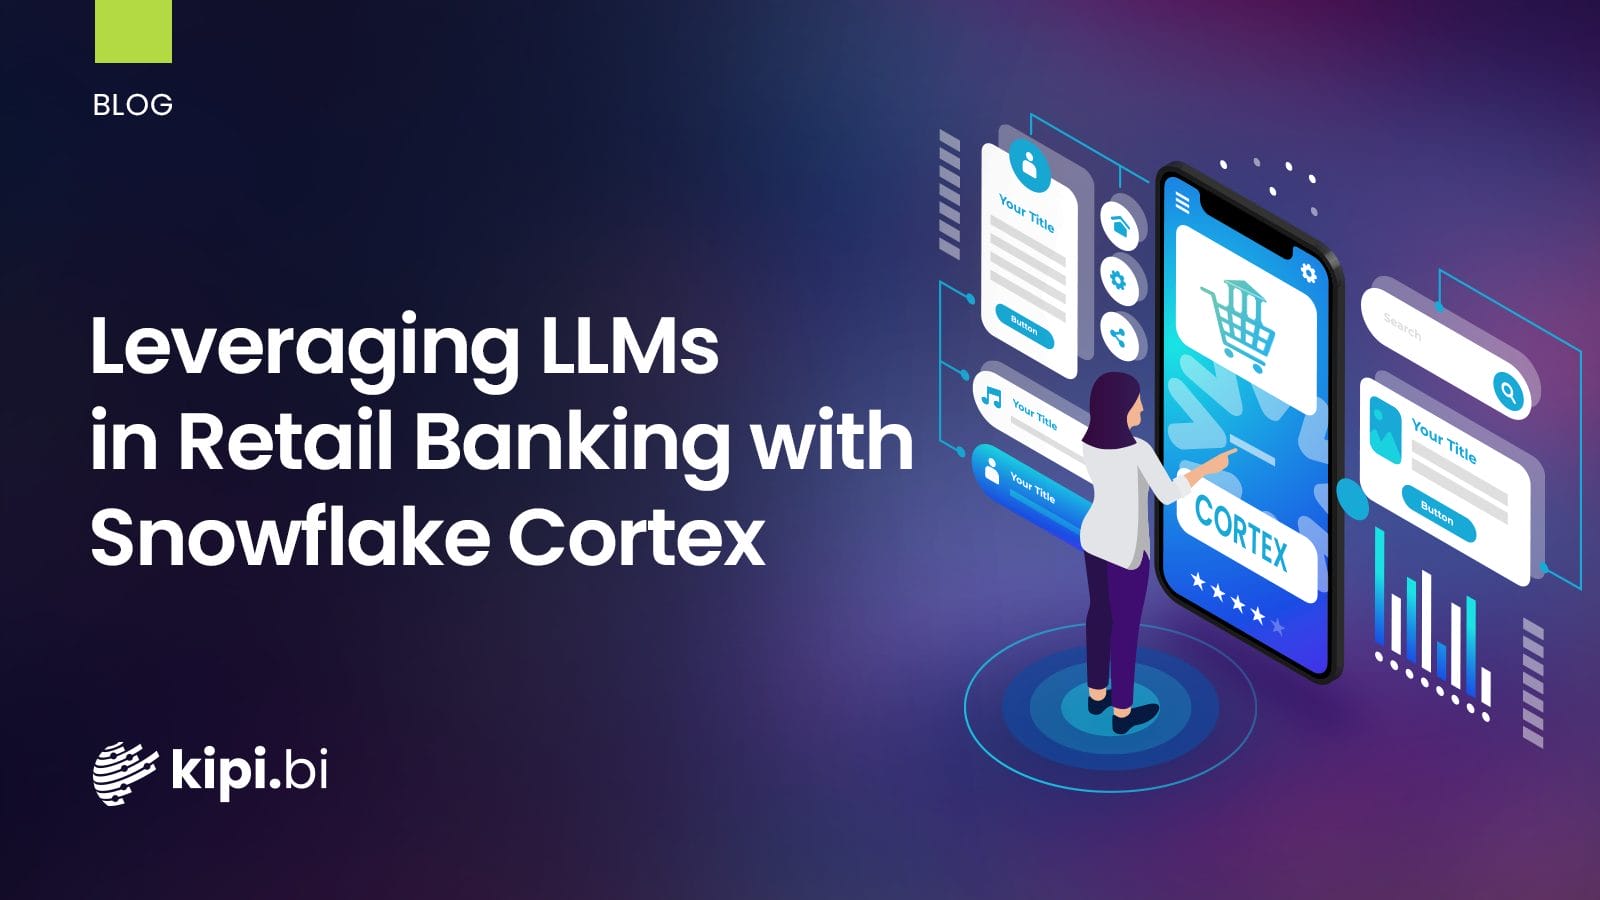 Leveraging LLMs in Retail Banking on Snowflake Using Snowflake Cortex: Unleashing Business Value